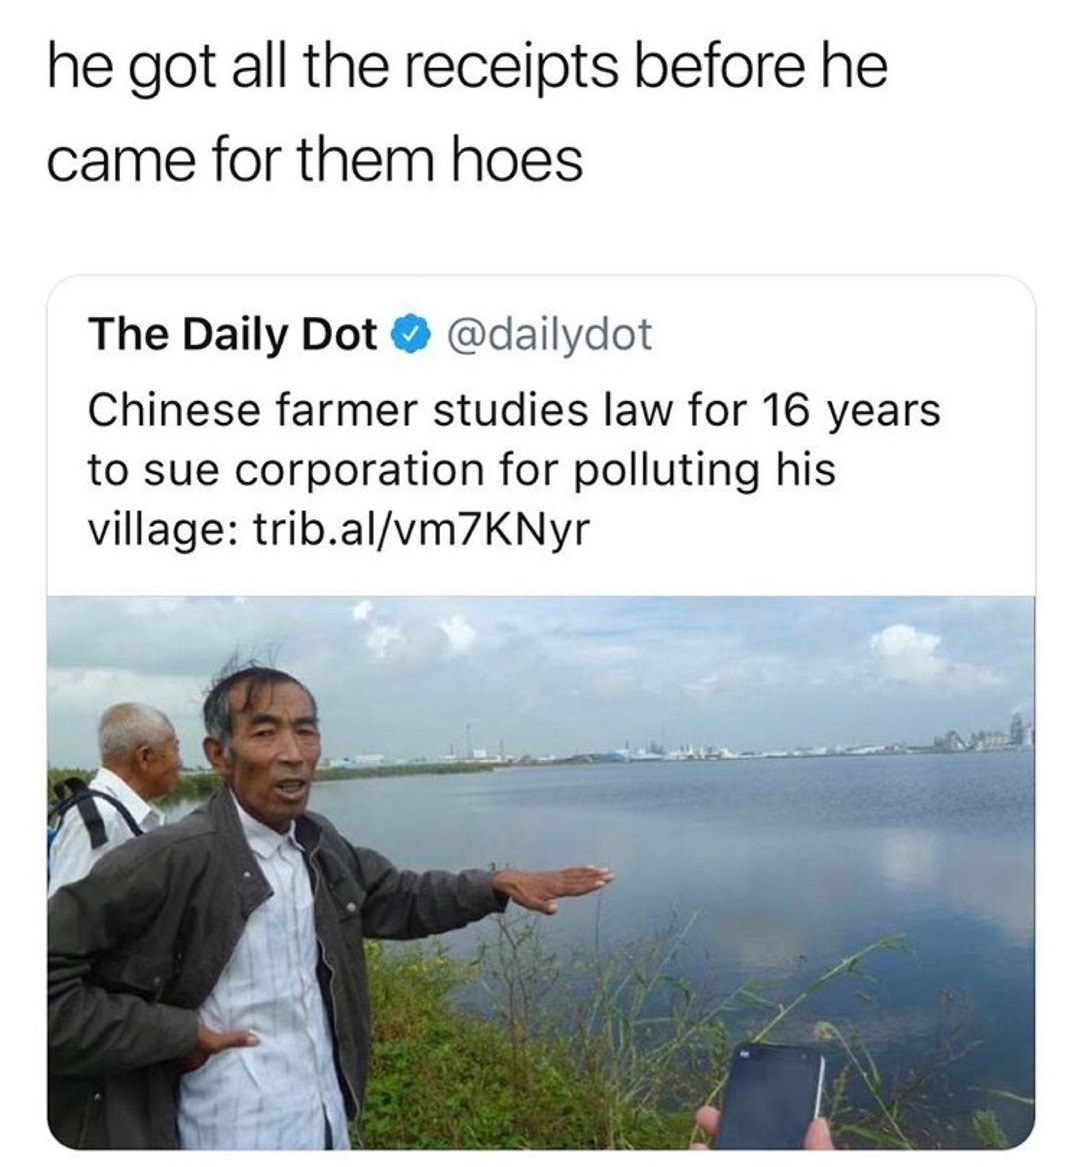 water resources - he got all the receipts before he came for them hoes The Daily Dot Chinese farmer studies law for 16 years to sue corporation for polluting his village trib.alvm7KNyr